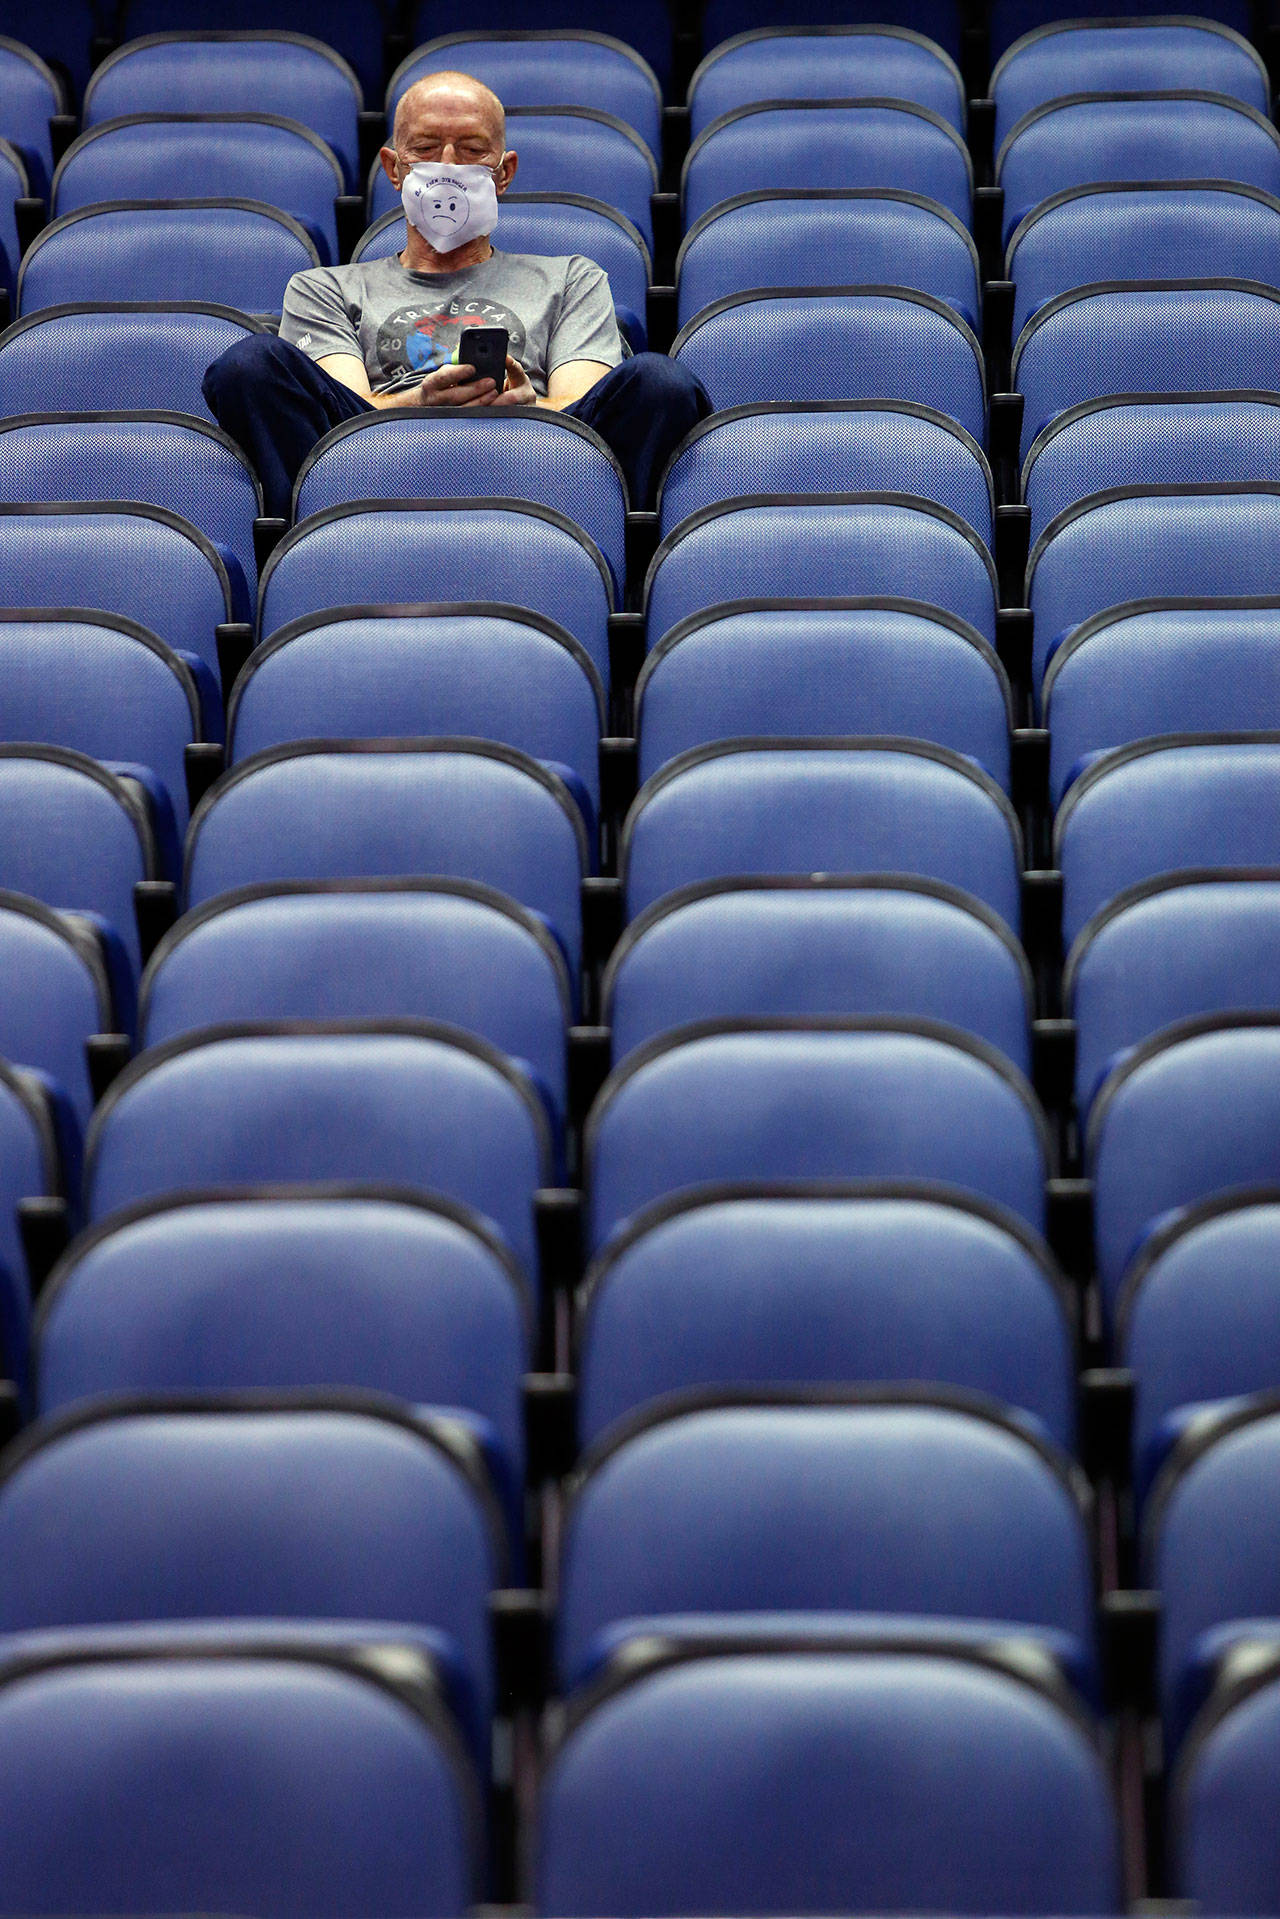 Mike Lemcke from Richmond, Va., sits in an empty Greensboro Coliseum after the NCAA college basketball games were cancelled at the Atlantic Coast Conference tournament in Greensboro, N.C., on Thursday, March 12, 2020. The biggest conferences in college sports all canceled their basketball tournaments because of the new coronavirus, seemingly putting the NCAA Tournament in doubt. (Ben McKeown/The Associated Press)